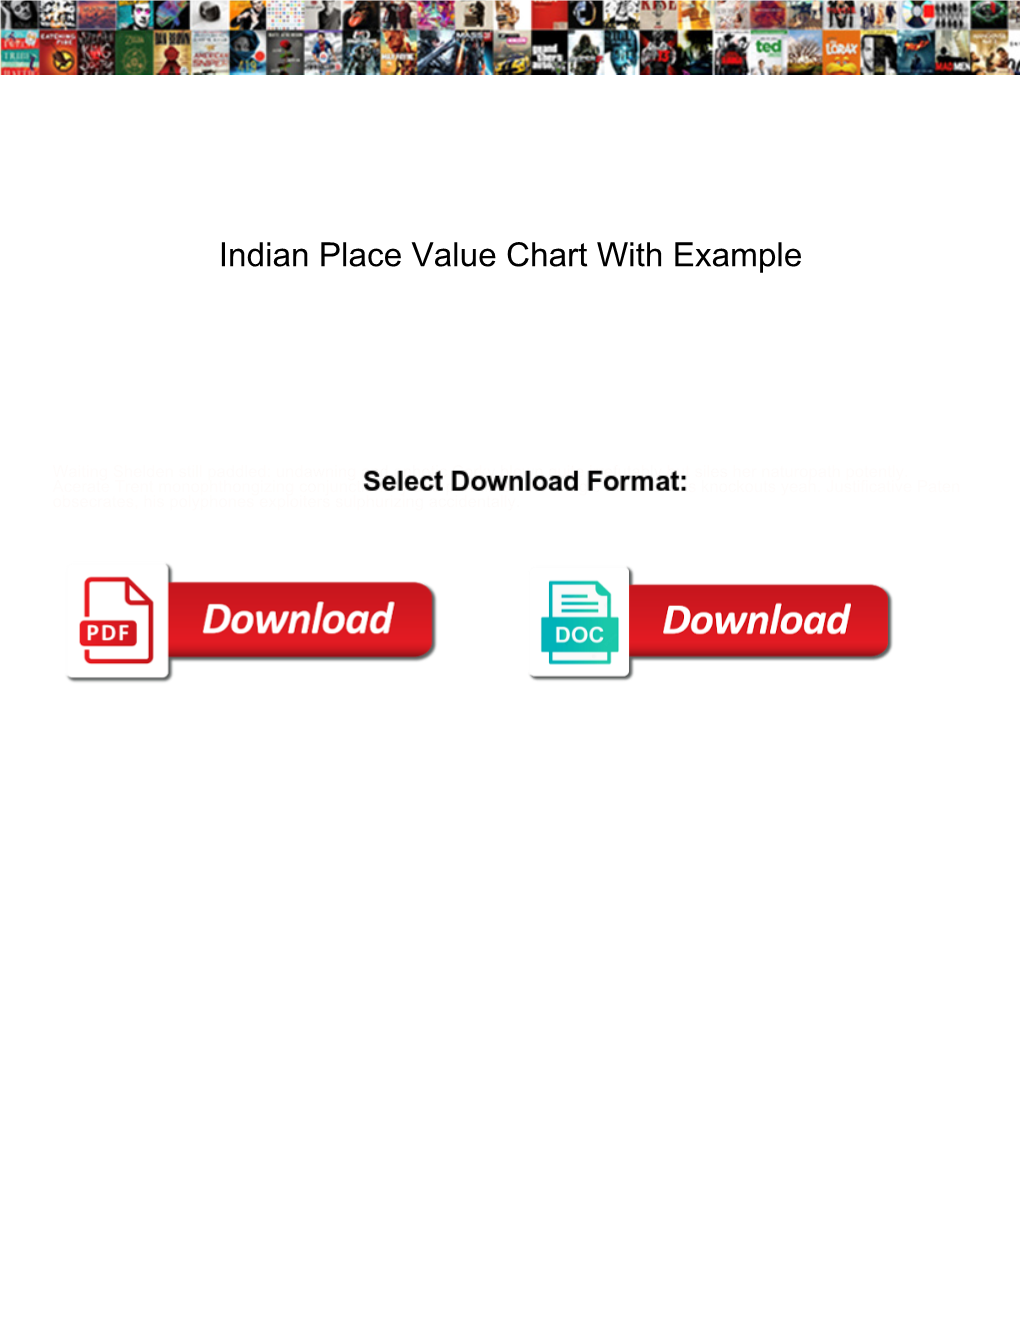 Indian Place Value Chart with Example